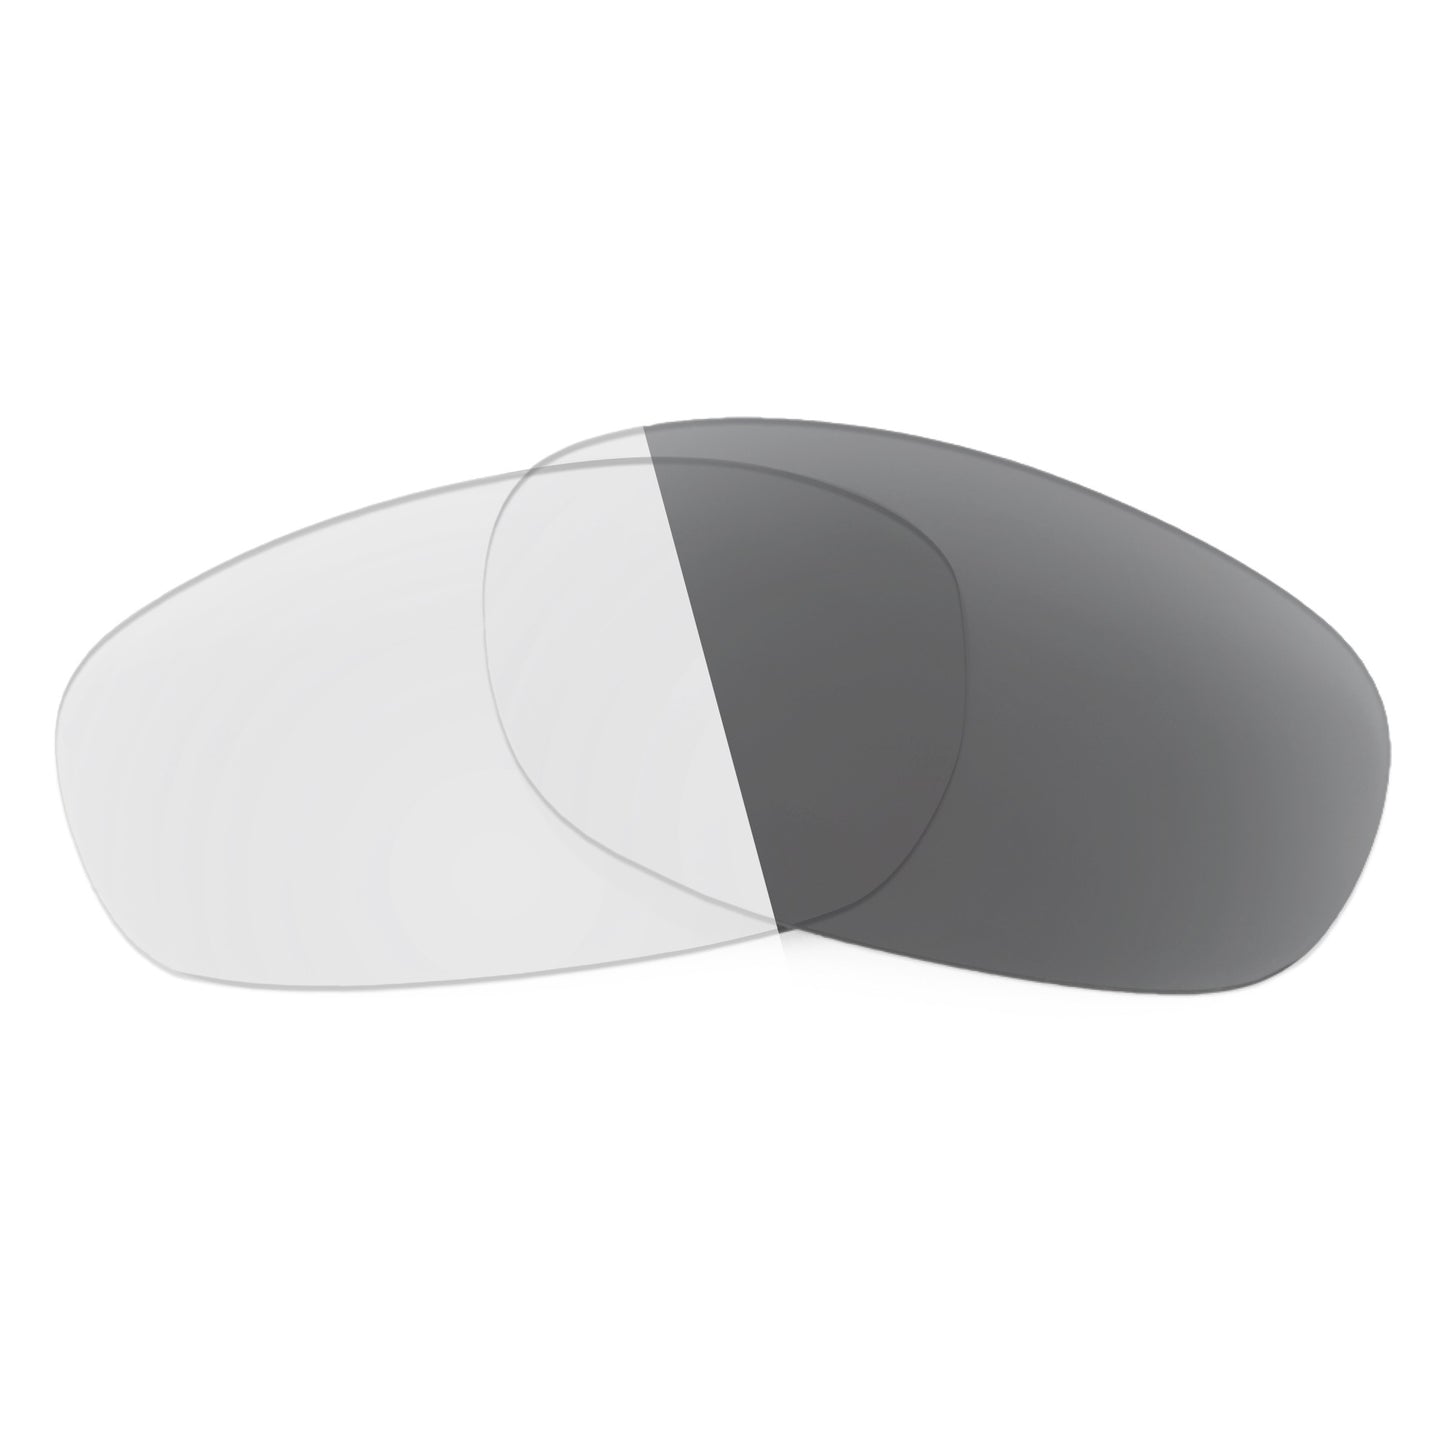 Revant replacement lenses for Maui Jim Cyclone MJ136 Non-Polarized Adapt Gray Photochromic